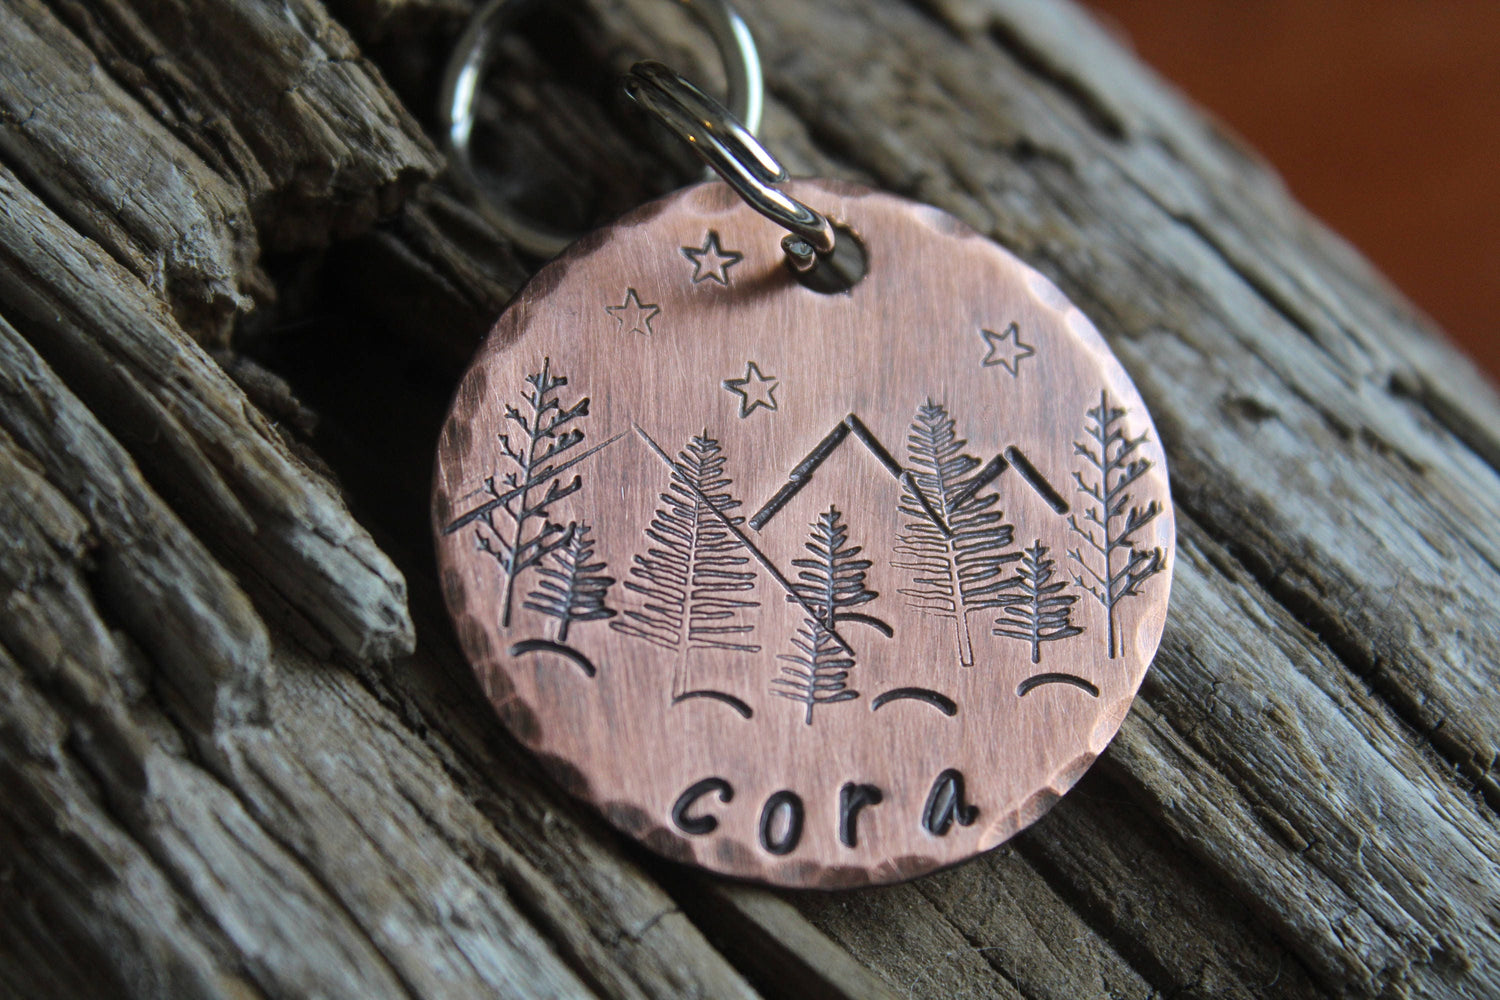 Pet ID with Mountains, Wilderness Tag, The Cora, Dog ID Tag, Dog Tag with Trees, Hand stamped ID, Custom Dog Tag, Tag for Dog, Pet Id Stars